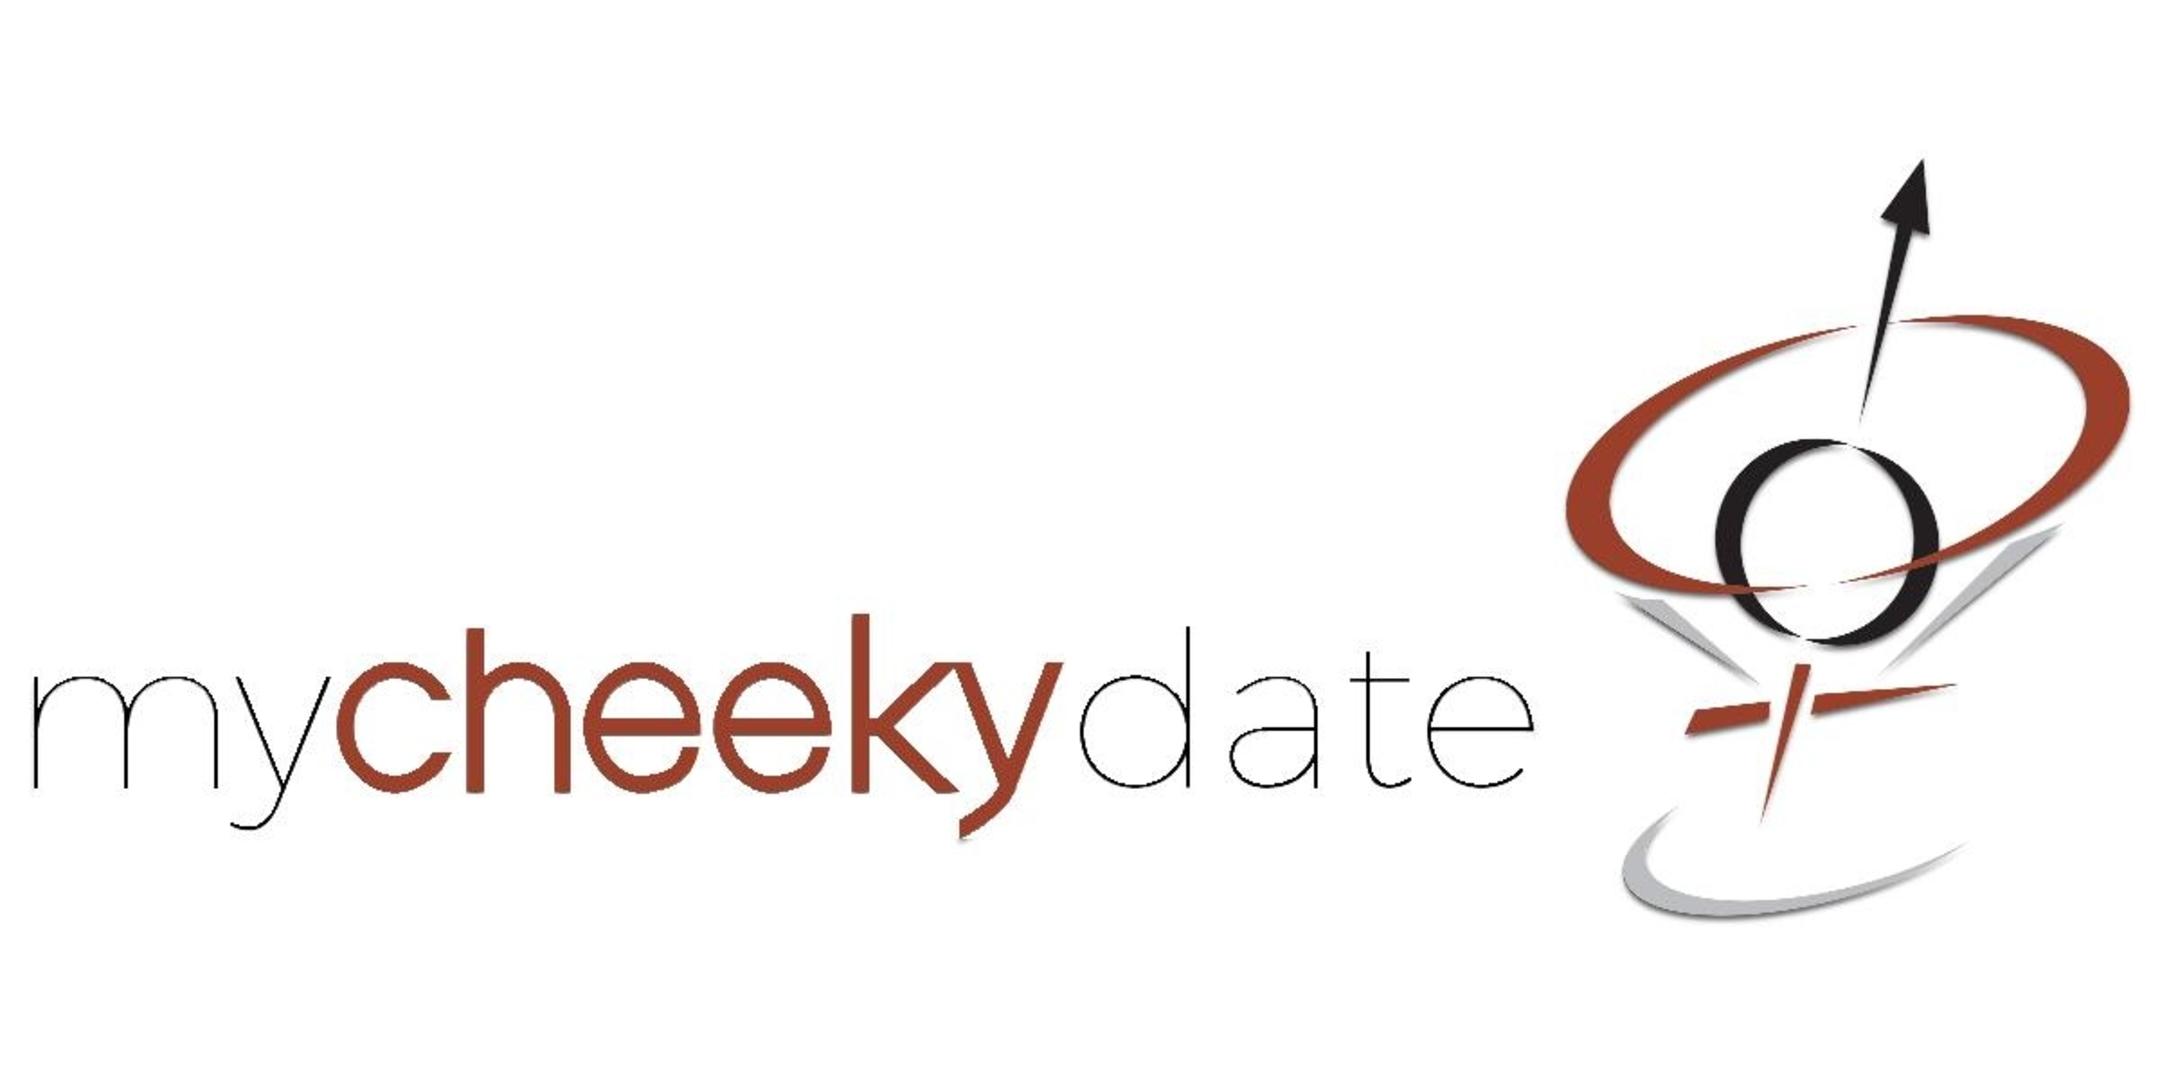 Minneapolis | Let's Get Cheeky! | Singles Event(Ages 32-42)